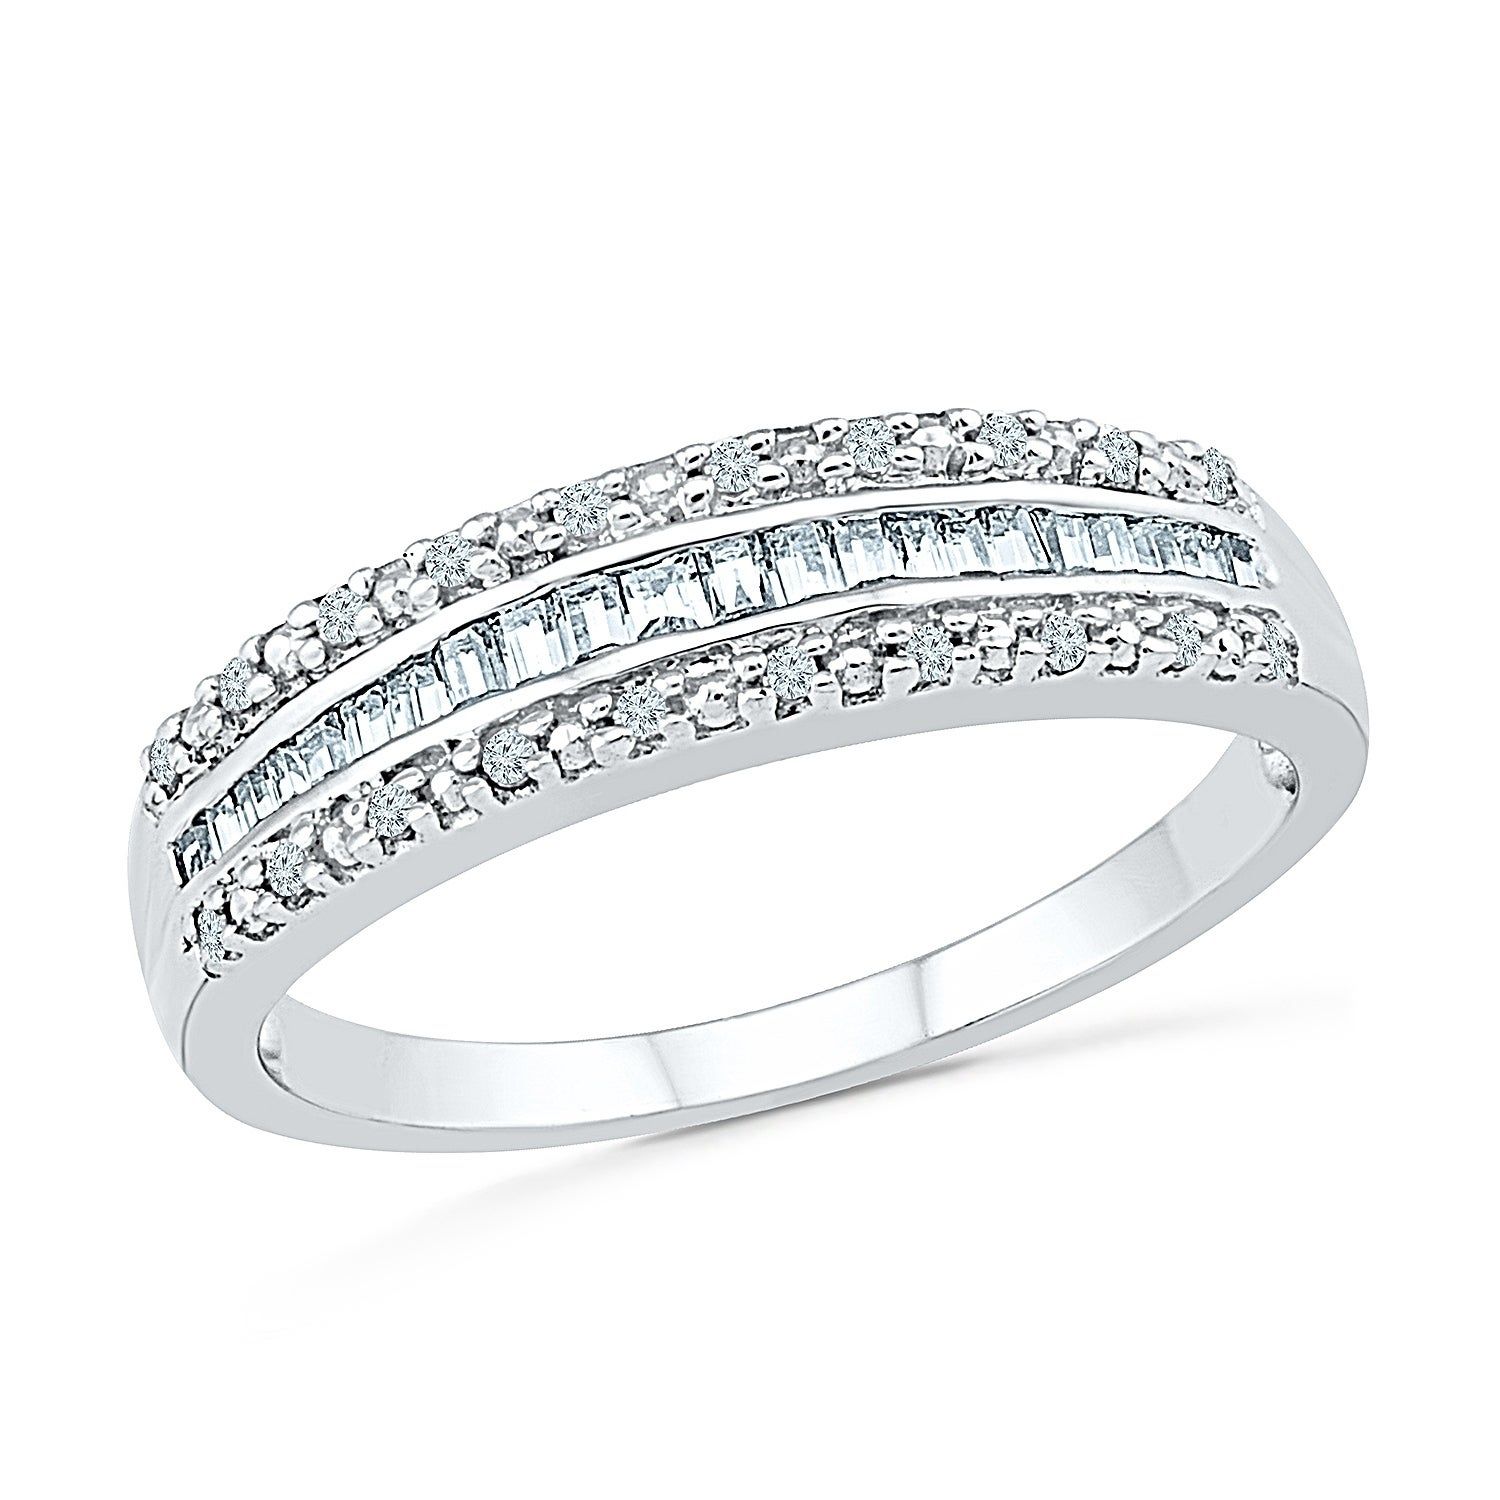 10kt White Gold Baguette And Round Diamond Fashion Ring – White I J With Regard To Most Up To Date Baguette And Round Diamond Weaved Anniversary Rings In White Gold (View 7 of 25)